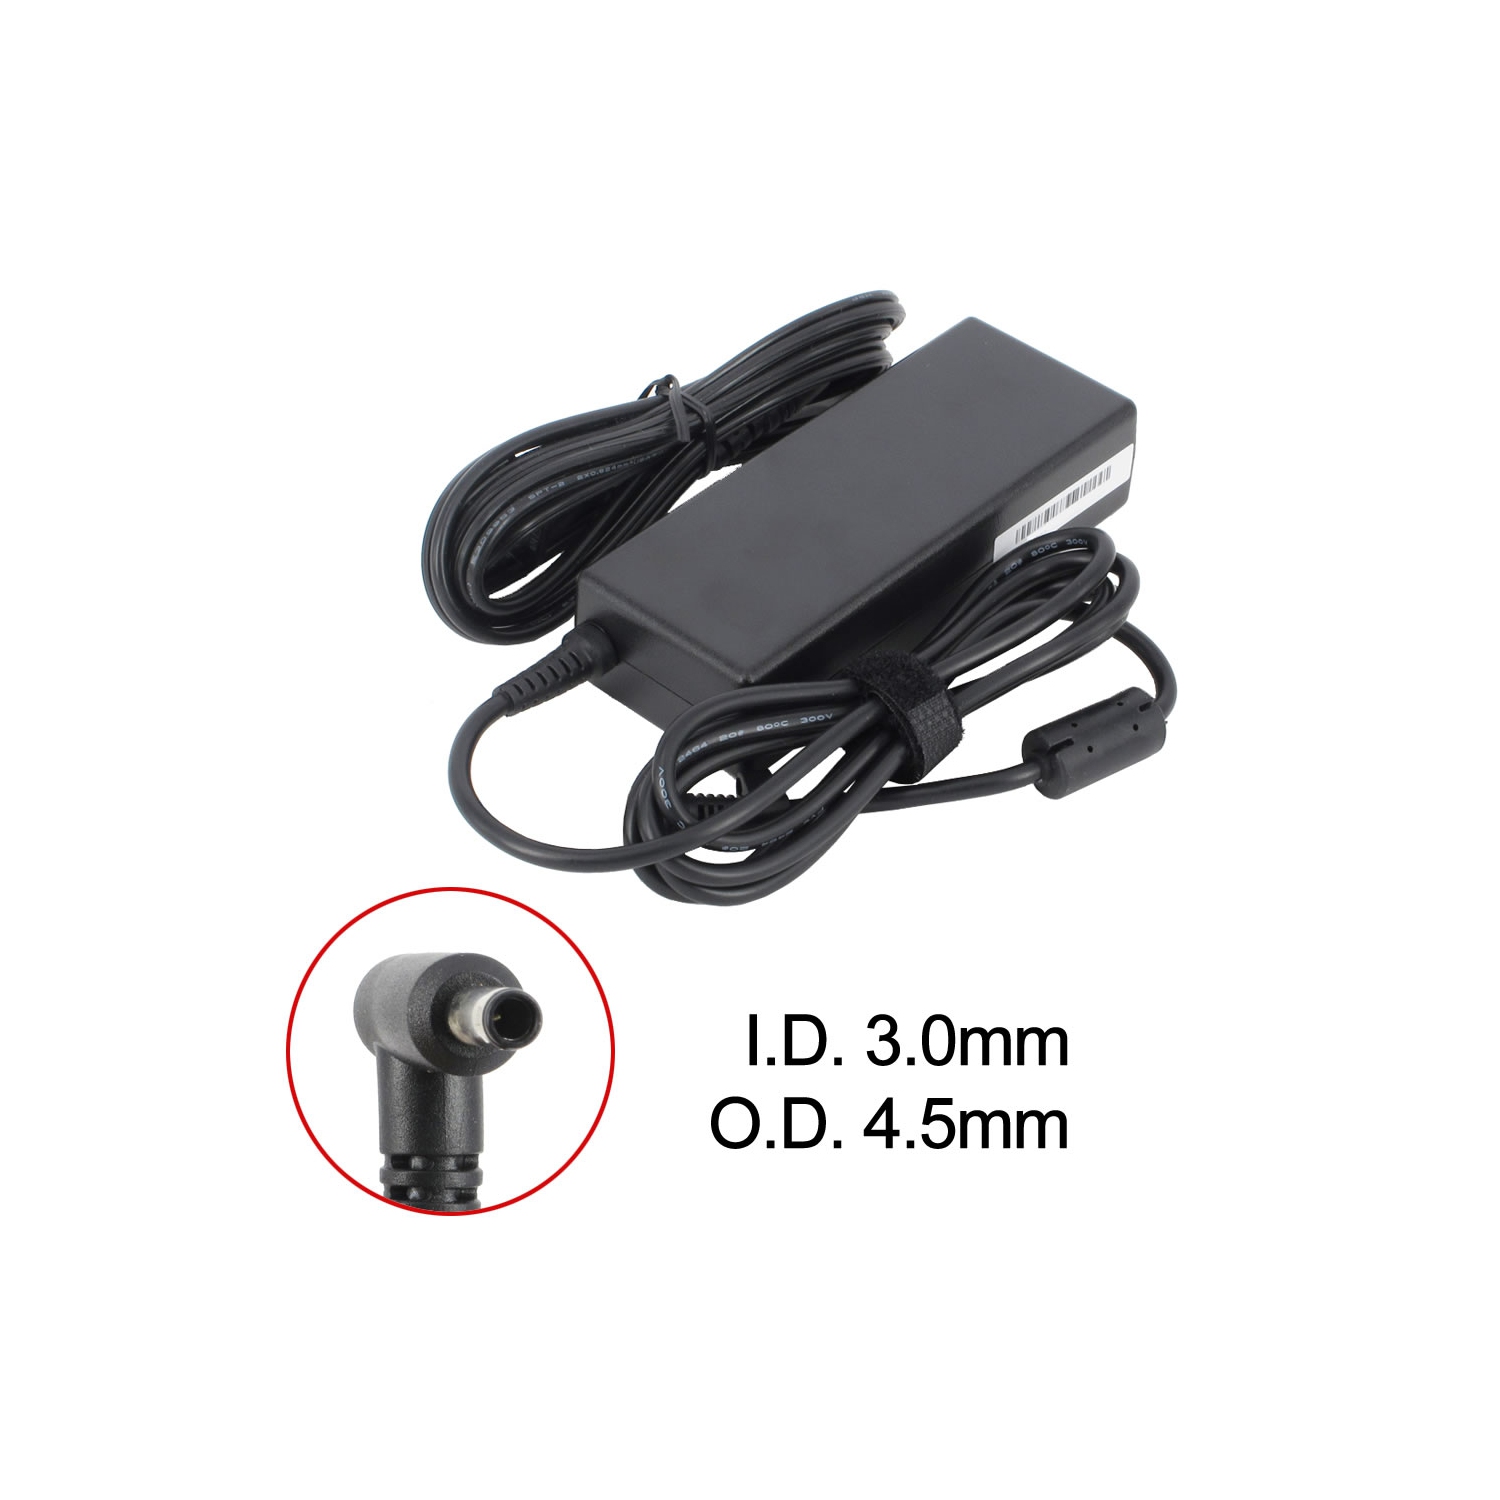 New Replacement Laptop AC Adapter for HP Pavilion 14-cd, 709985-002, 709986-004, 710414-001, A090A07DL, PA-1650-34HE